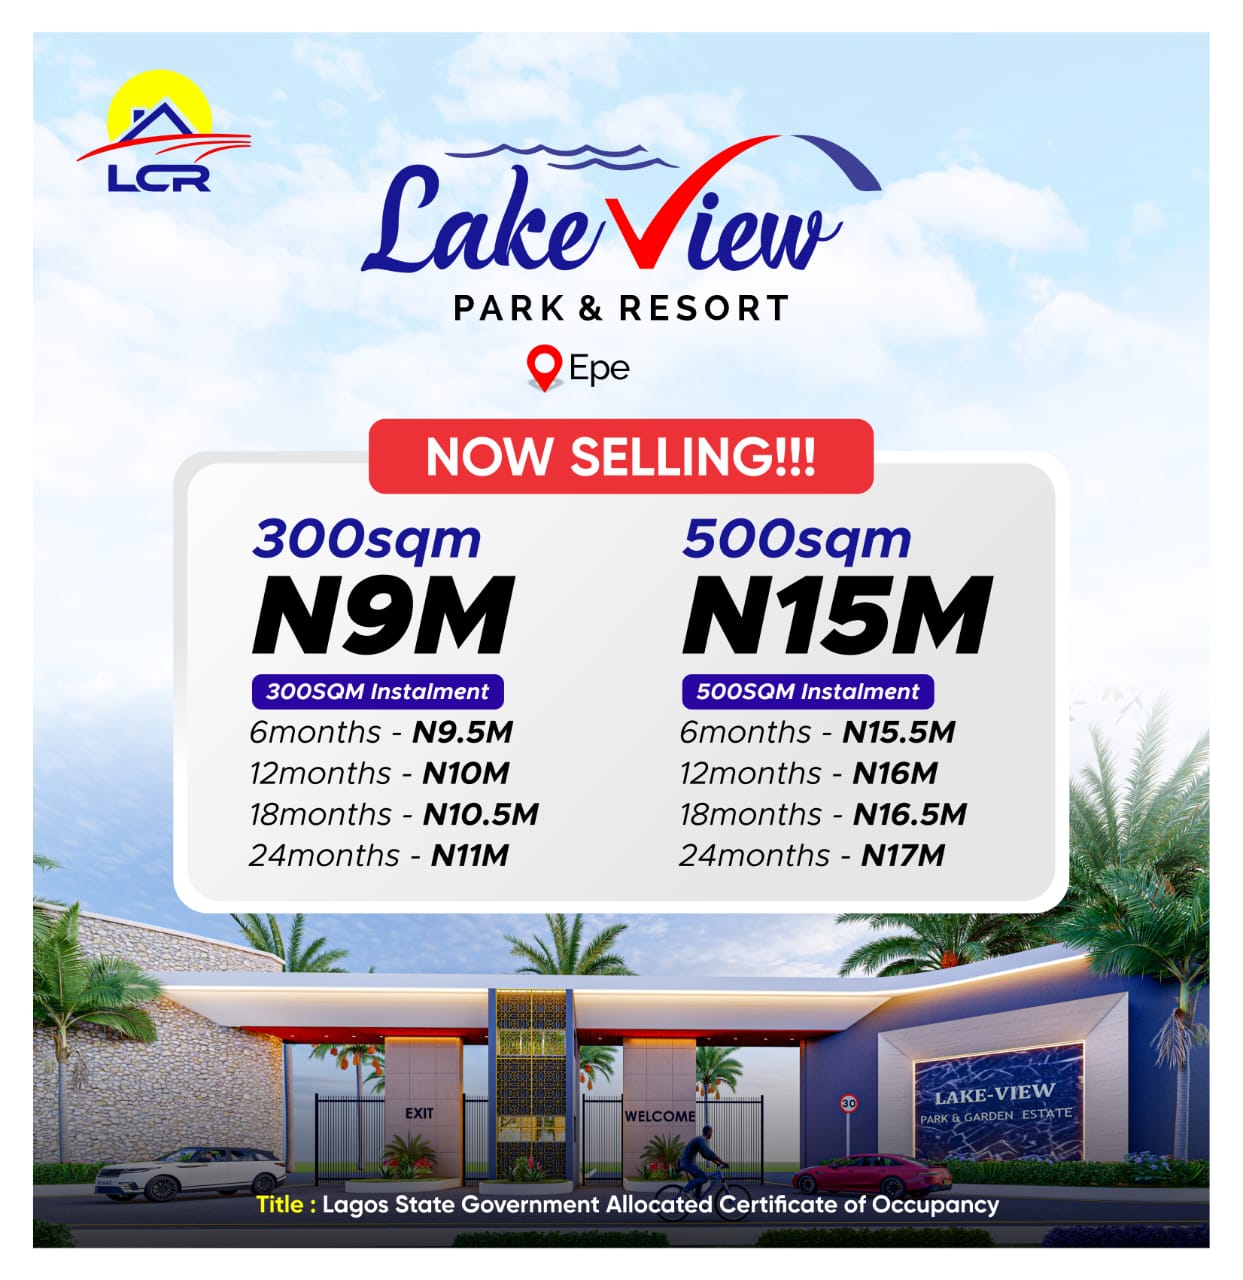 Lake View Park & Resort, located in Ketu, Epe, Lagos, is a serene and picturesque escape from city life. It is also pocket